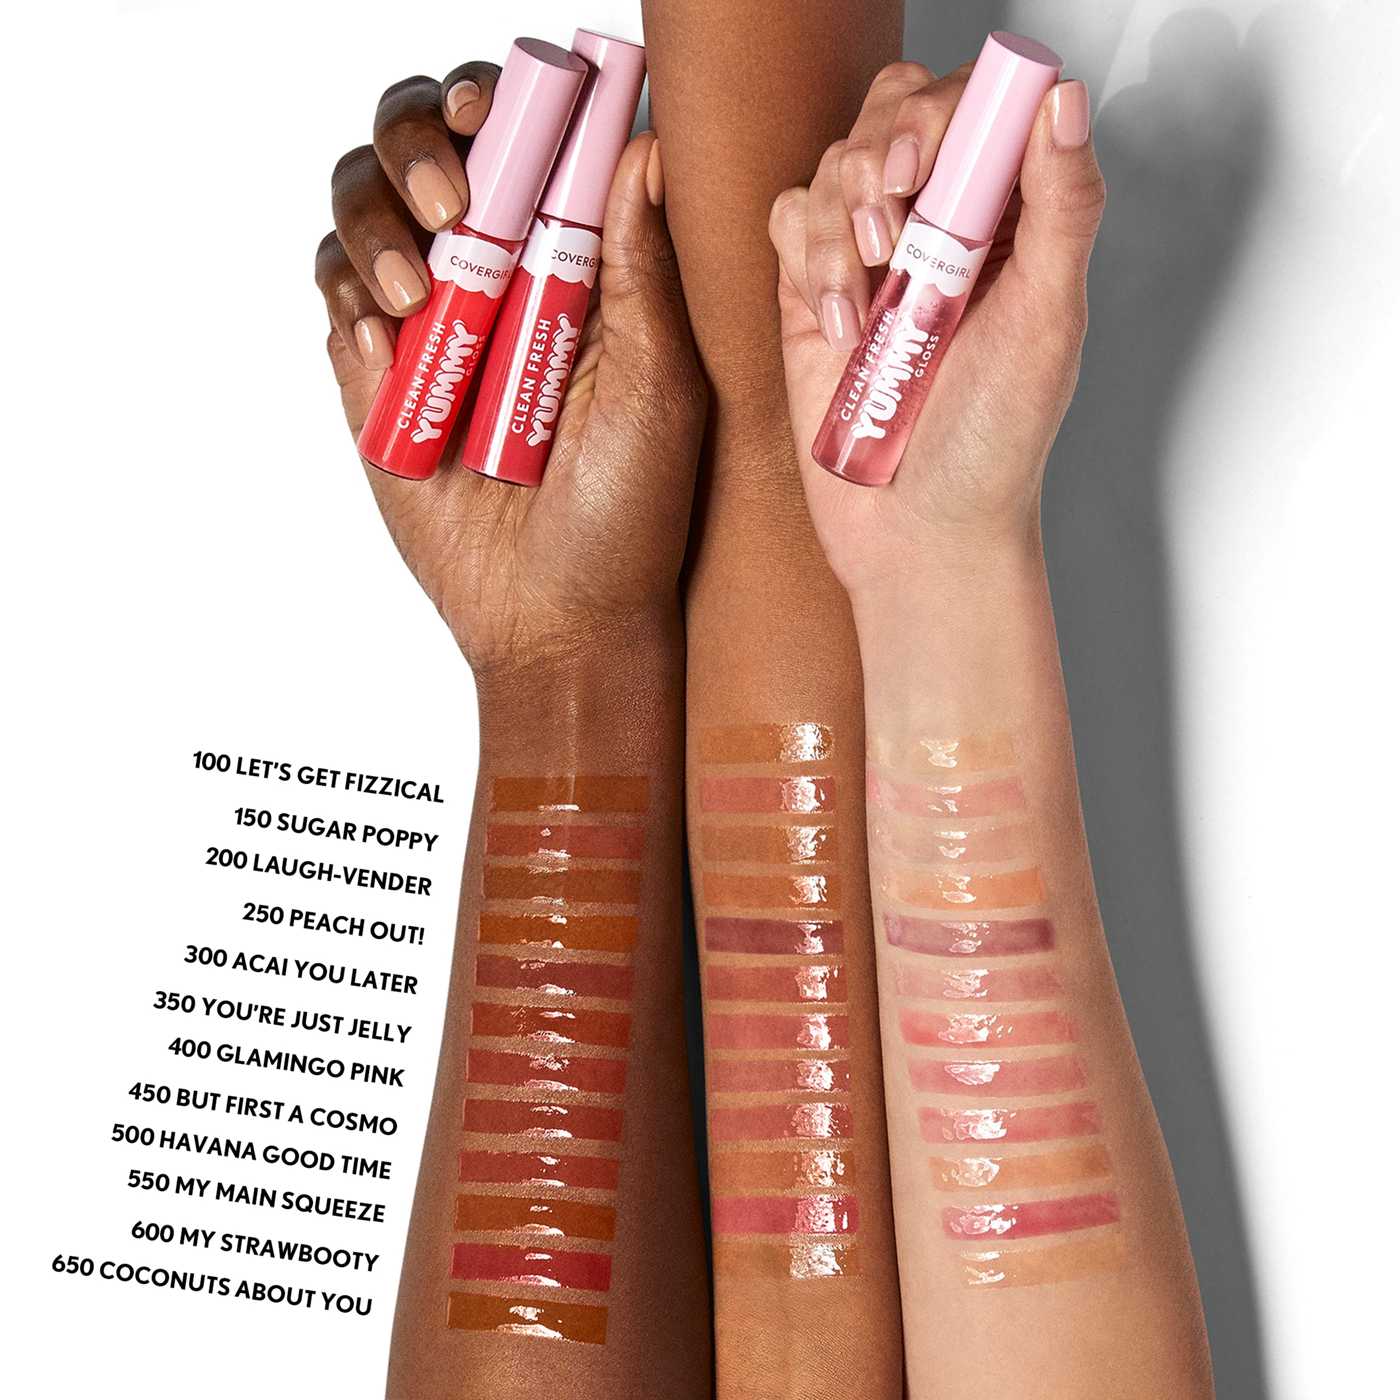 Covergirl Clean Fresh Yummy Lip Gloss - Coconuts About You; image 9 of 10